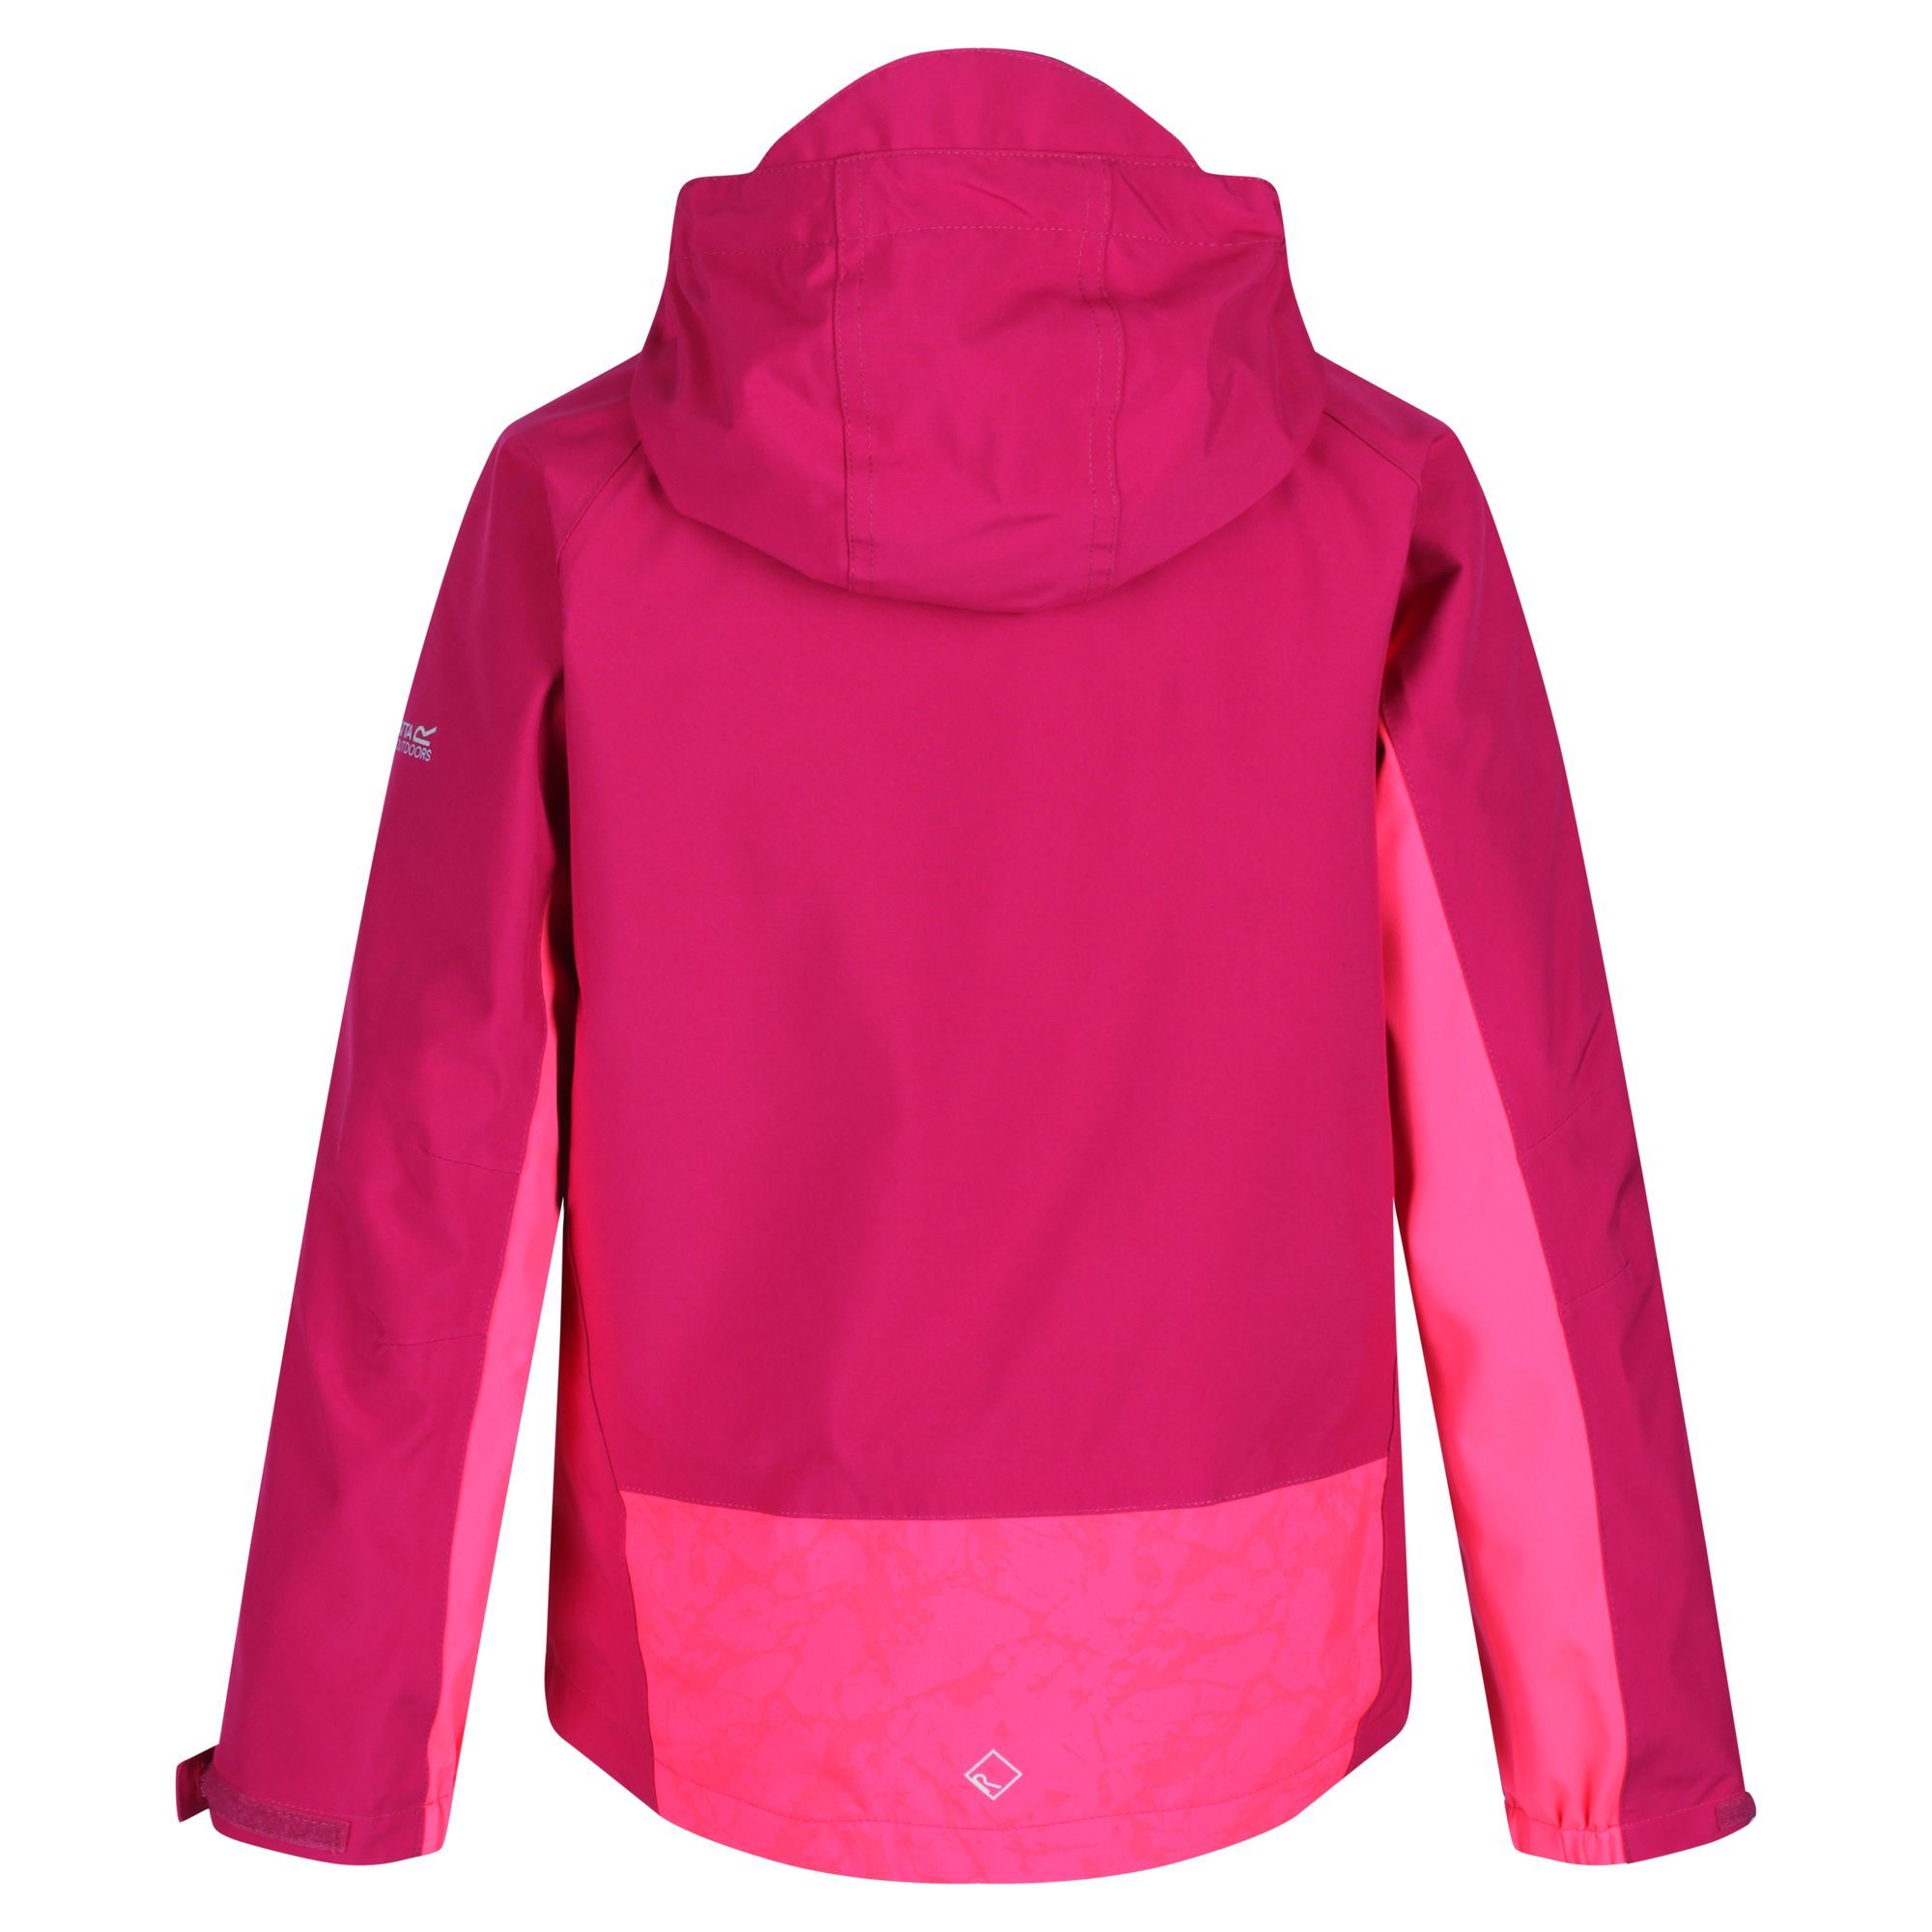 Material: polyester: 100%. Waterproof and breathable Isotex 15000 stretch fabric. Breathability rating: 10,000g/m2/24hrs. Highly reflective printed stretch panels in strategic zones for enhanced visability. Durable water repellent finish. Taped seams. Mesh lined. grown on hood with sewn on peak at front. 2 zipped lower pockets. Adjustable cuffs. Adjustable shockcord hem age 7+. Printed name label (up to age 8). Inner. 140gsm mini stripe microfleece. 2 lower pockets.